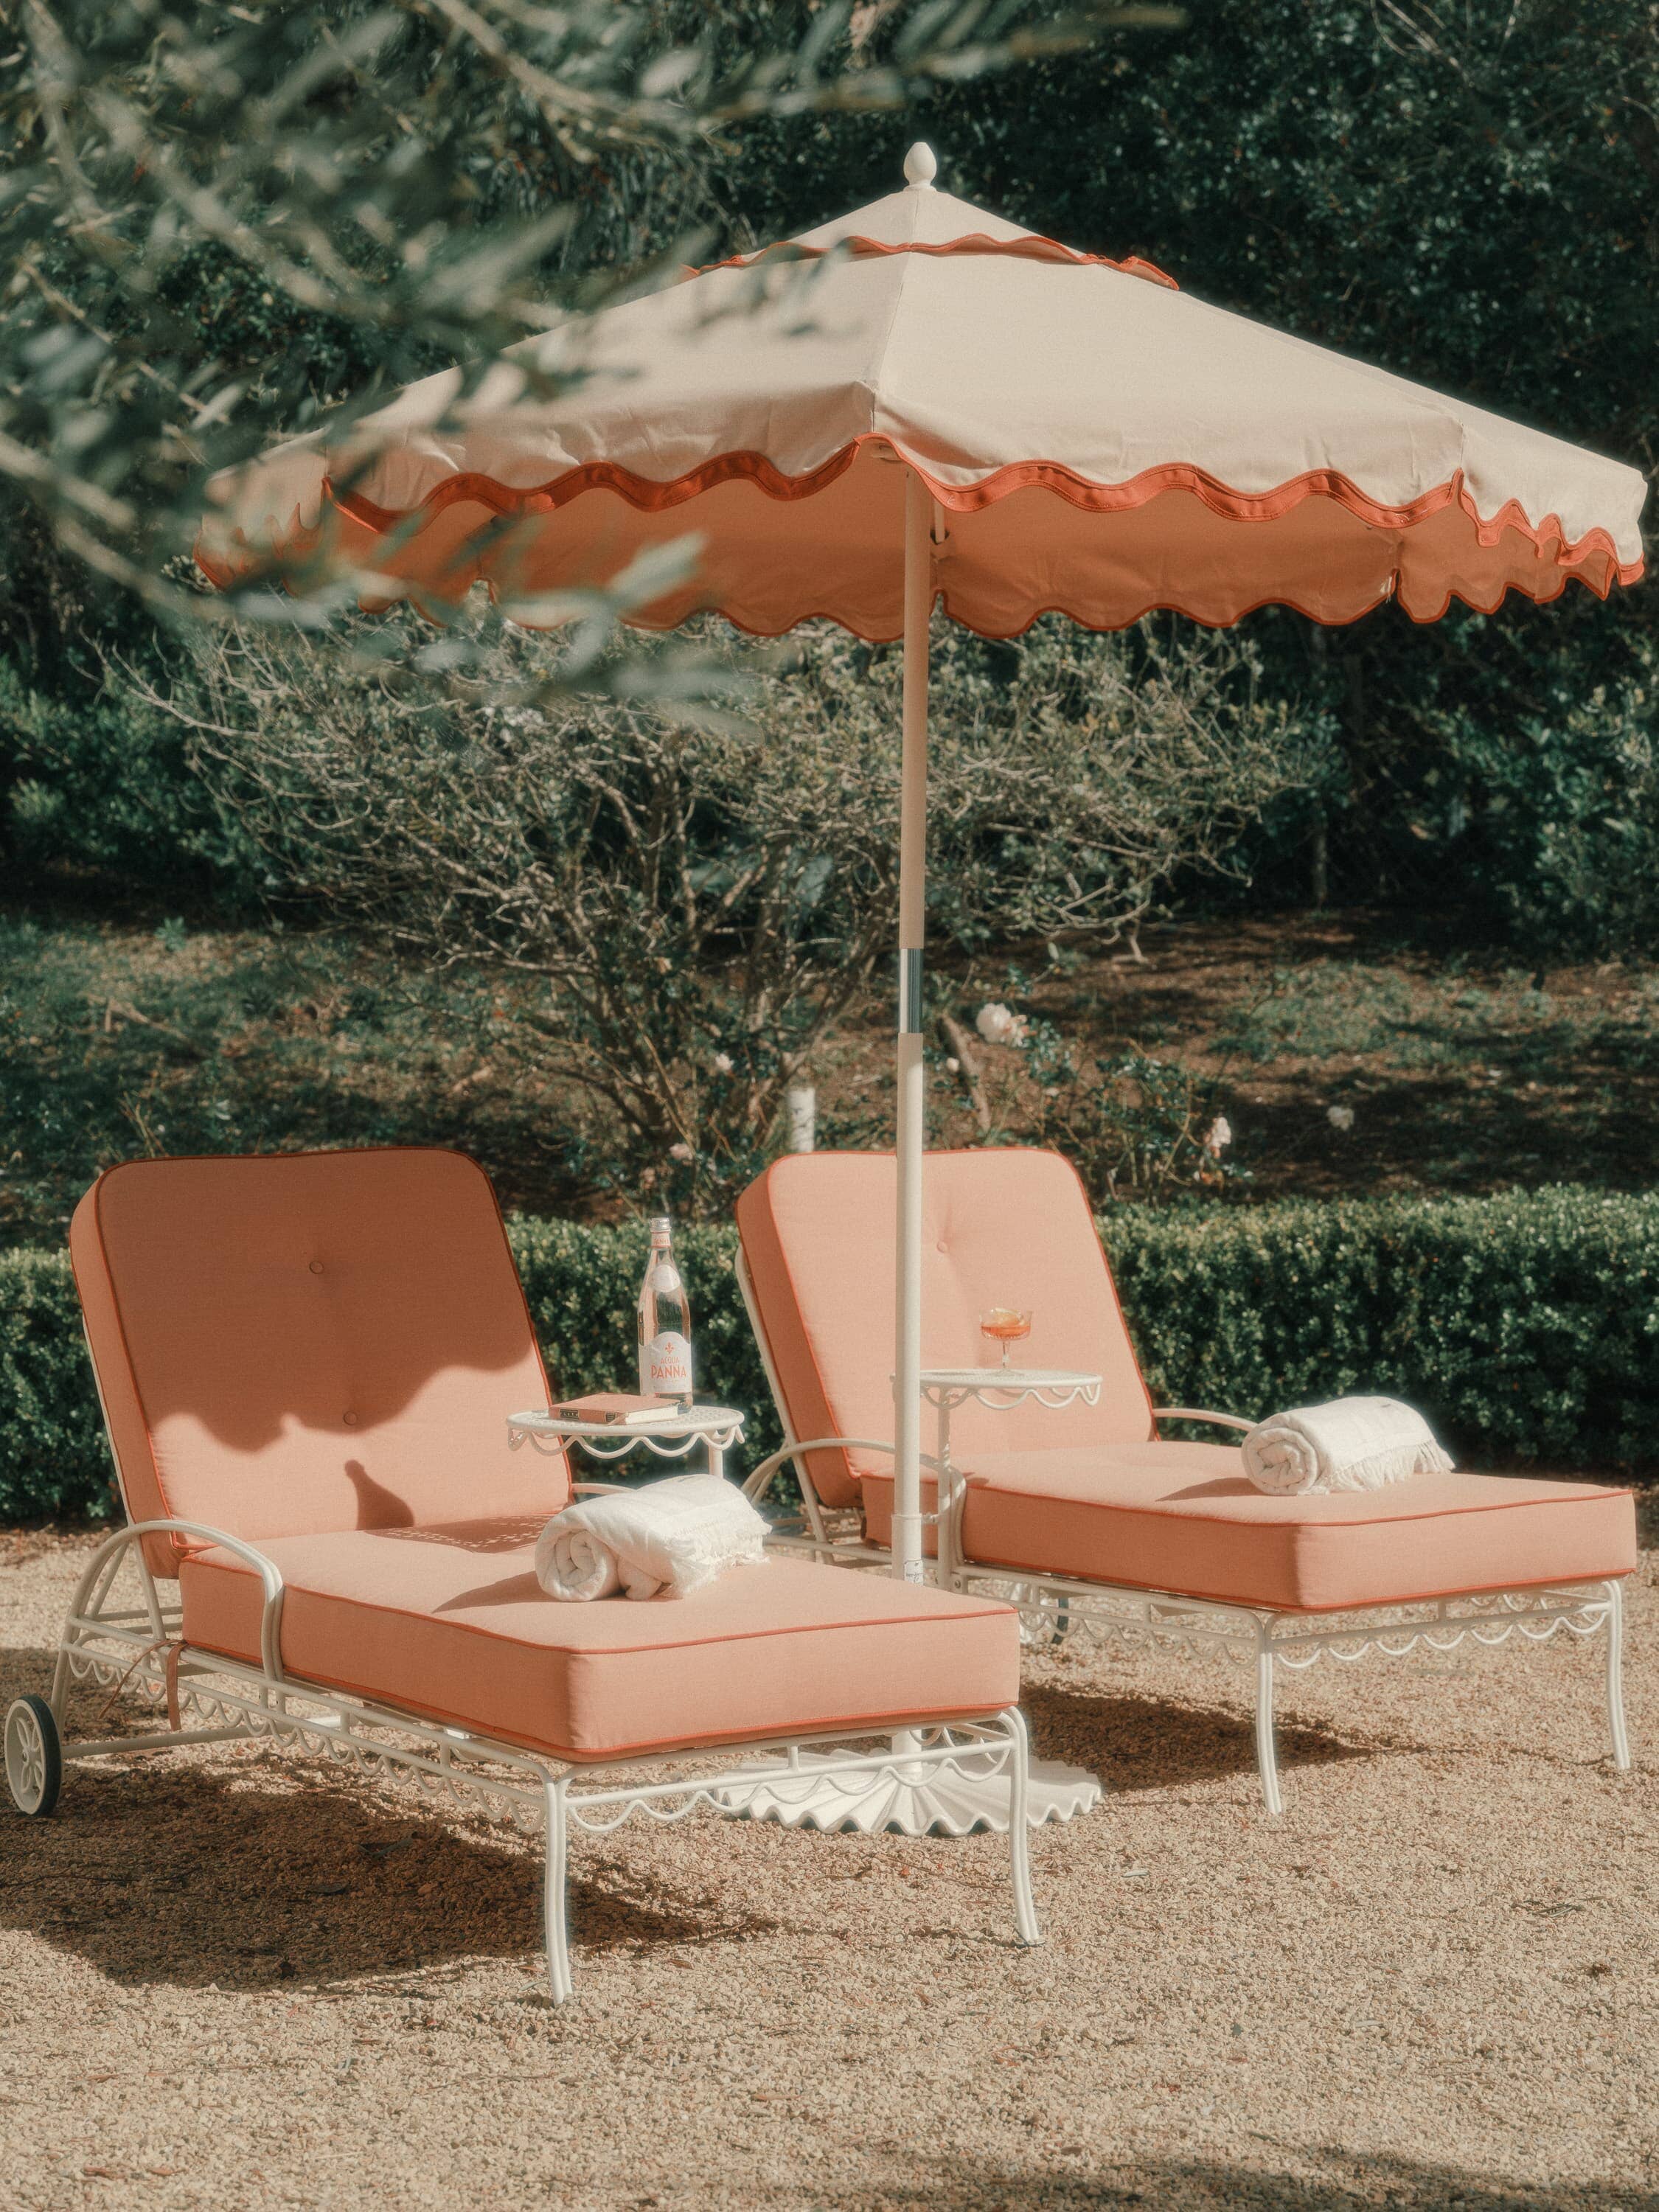 Riviera pink market umbrella and pink sun loungers on a patio